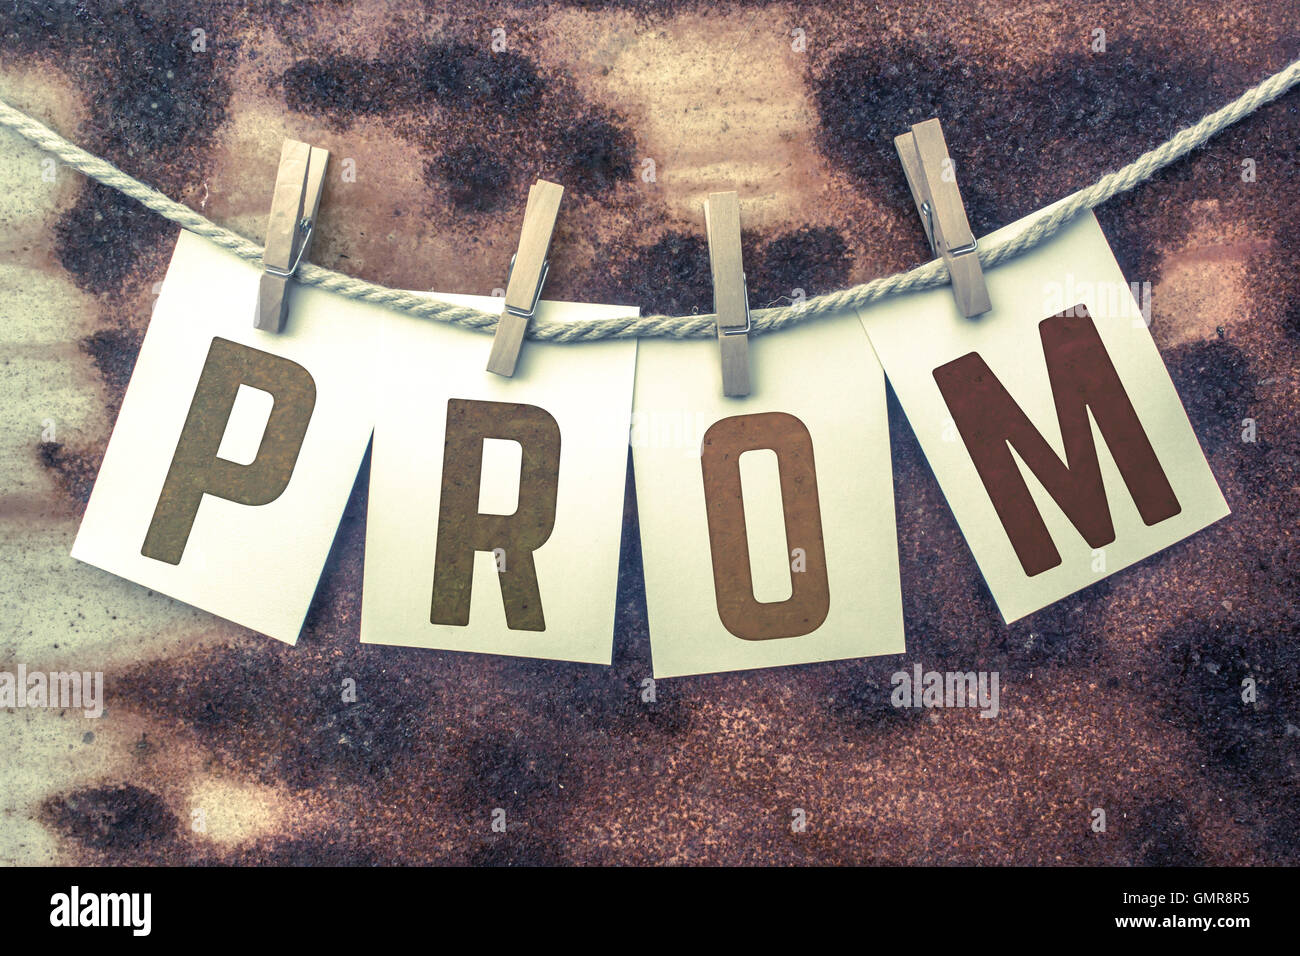 The word 'PROM' stamped on cards and pinned to an old piece of twine over a rusted metal background. Stock Photo